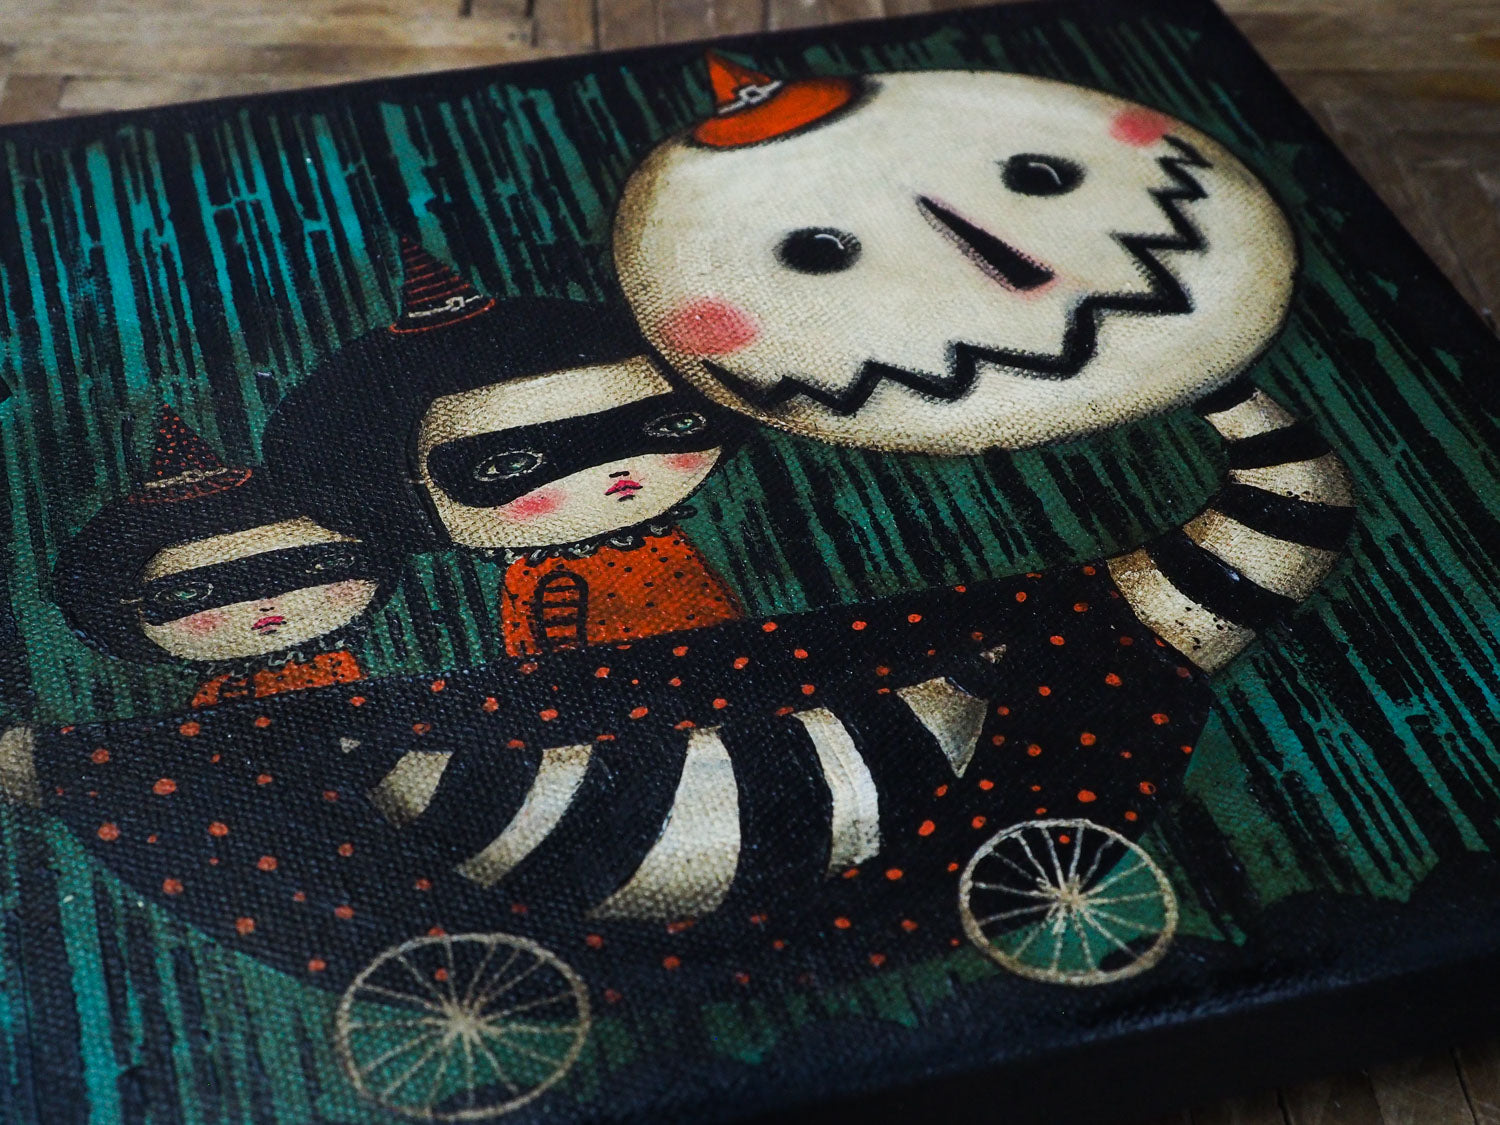 Halloween is celebrated by Danita in the best way, with an amazing collection of mixed media witches, pumpkins and strange characters the lurk in darkness on Halloween.